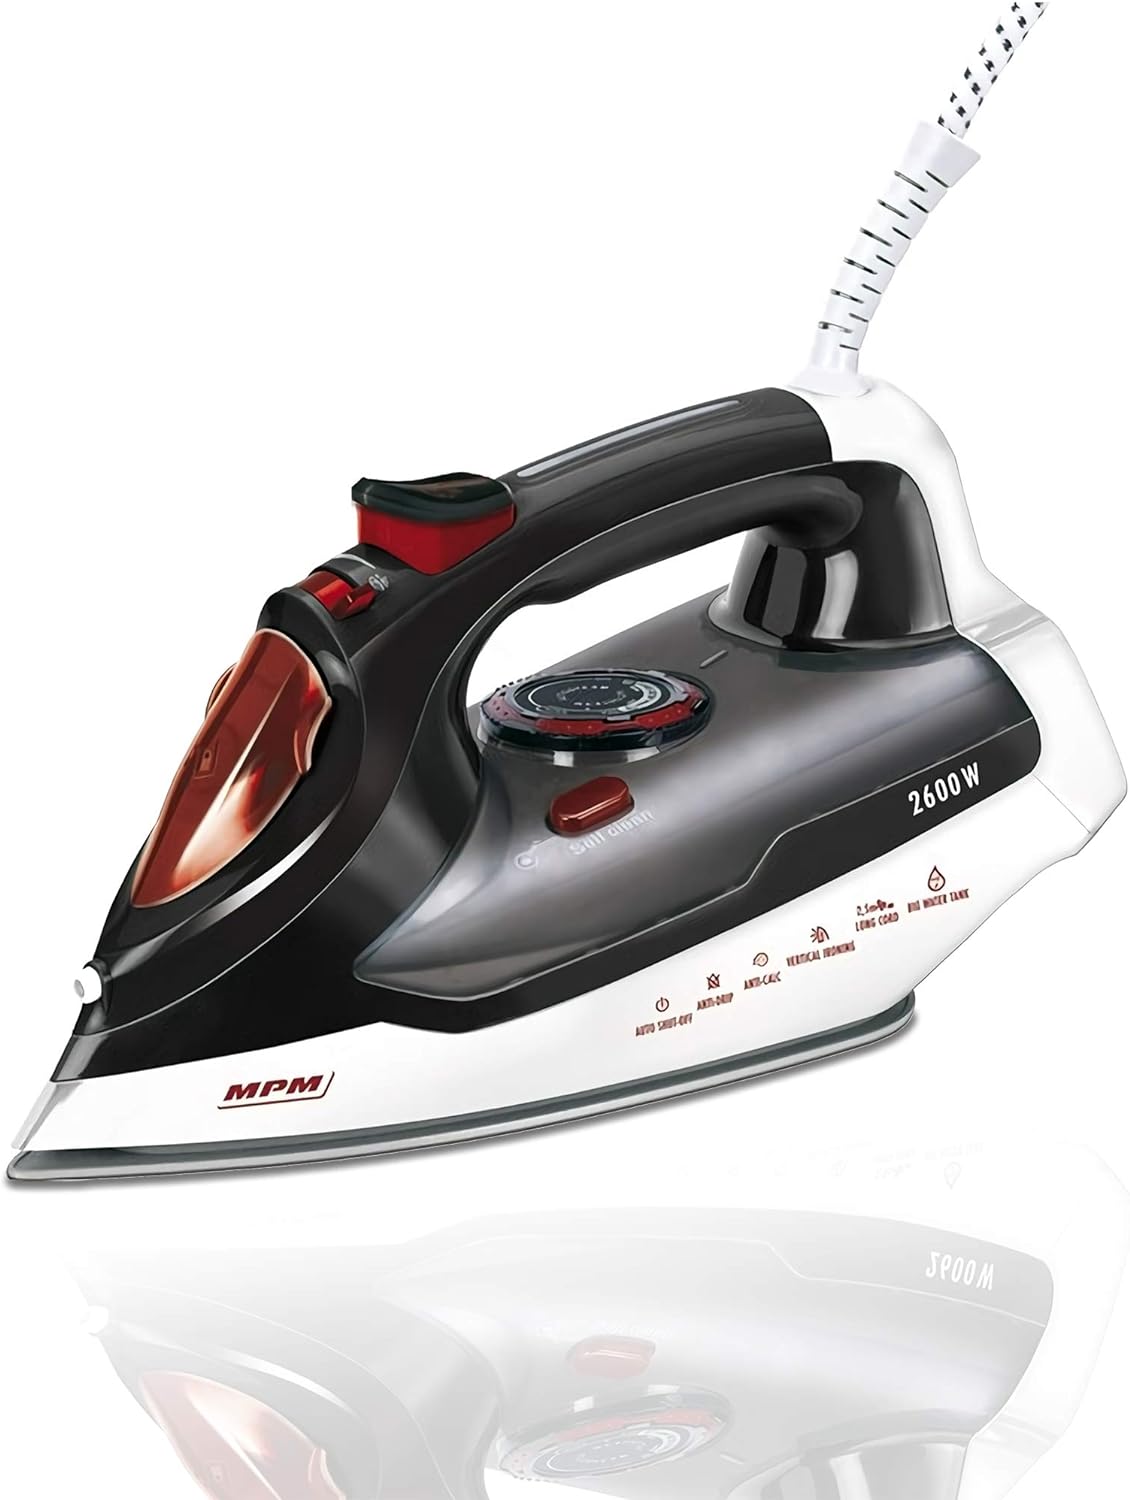 MPM MZE-17 Iron, Ceramic Soleplate, Steam Iron, Vertical Steam, Steam Tapping, Self-Cleaning, Drip Stop, 7 Functions, 430 ml Reservoir, Automatic Shut-Off, 2600 W